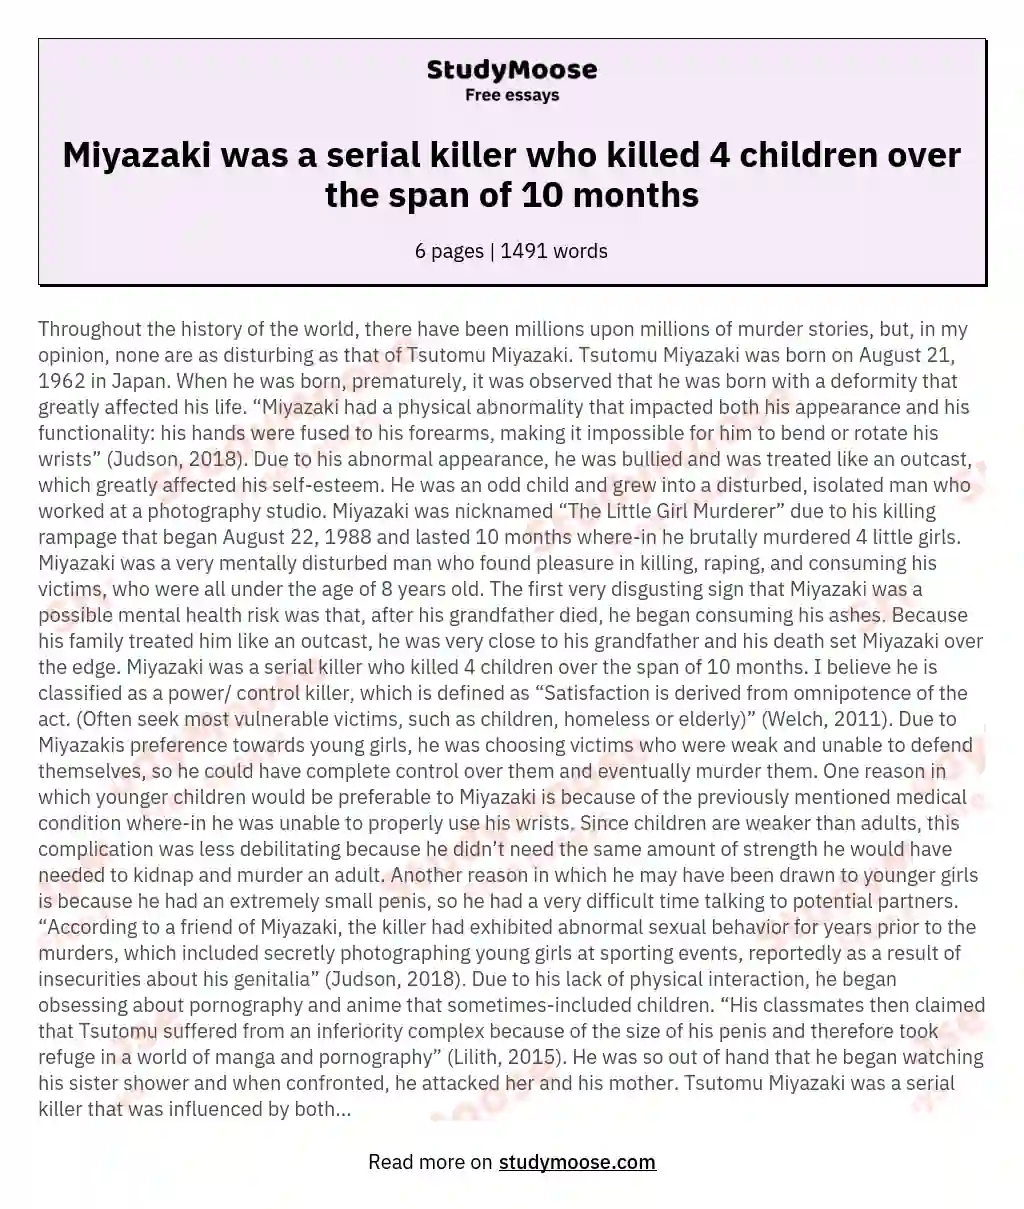 Miyazaki was a serial killer who killed 4 children over the span of 10 months essay